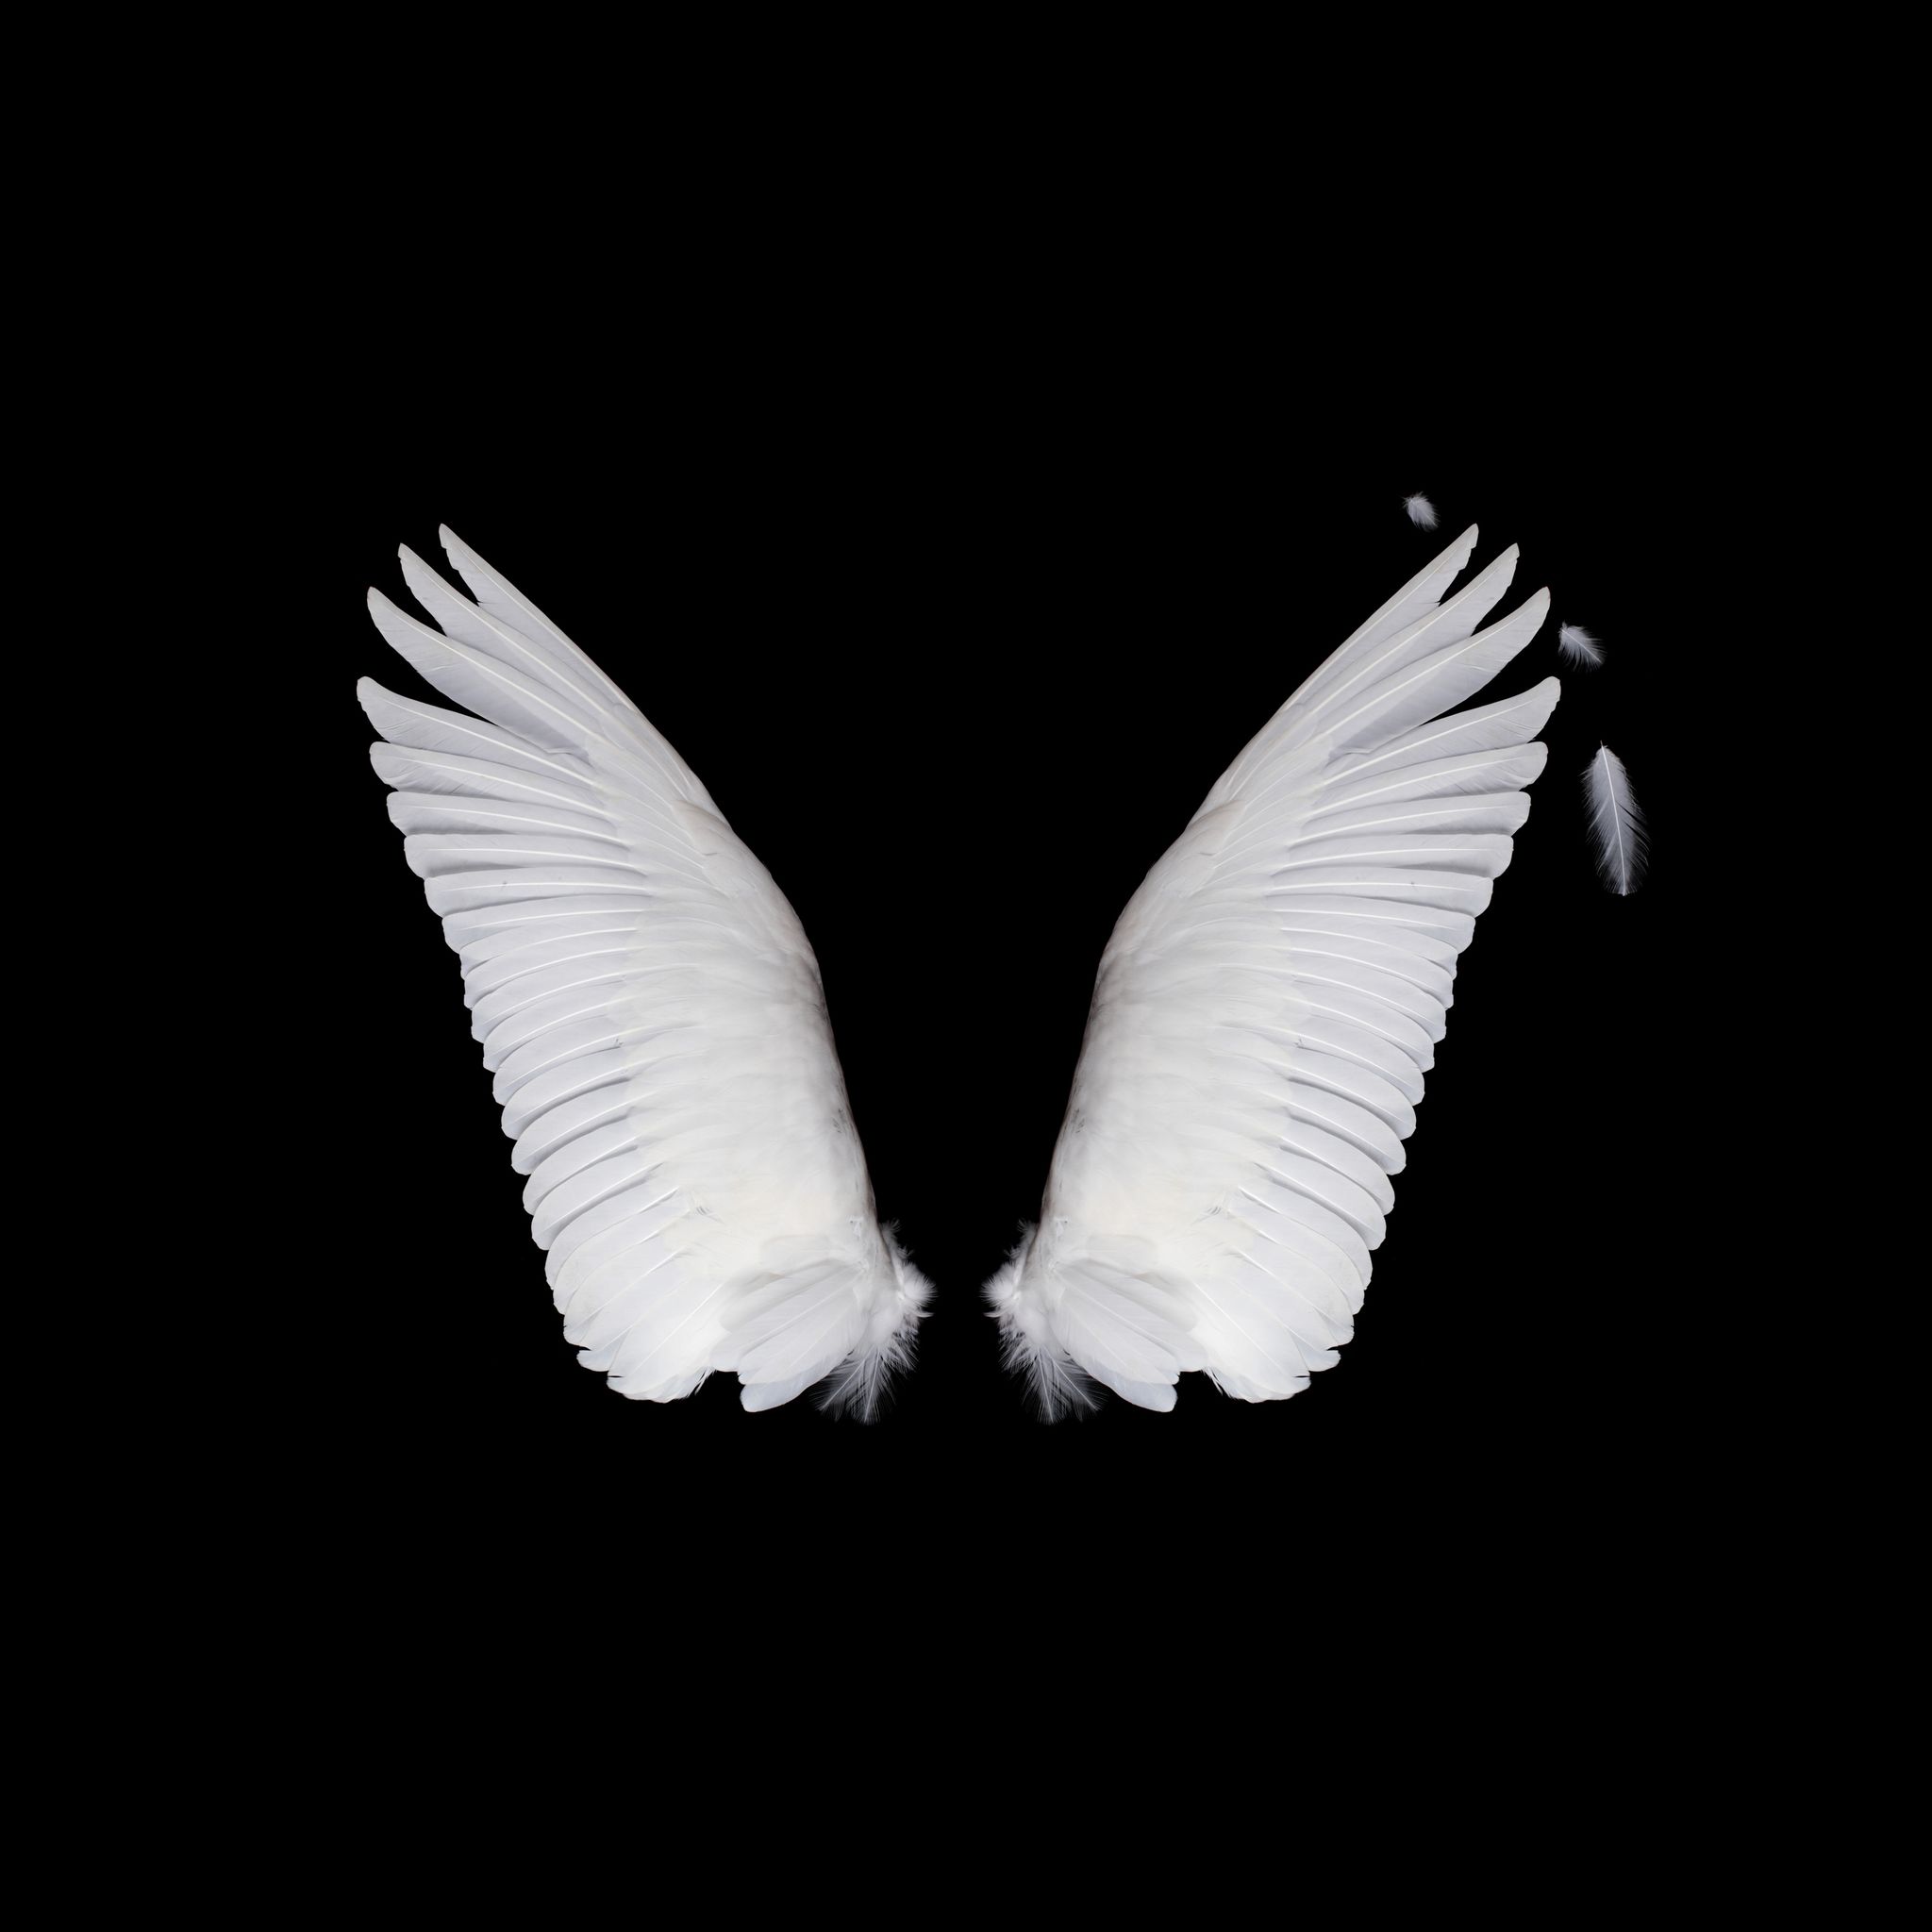 wings isolated on black background